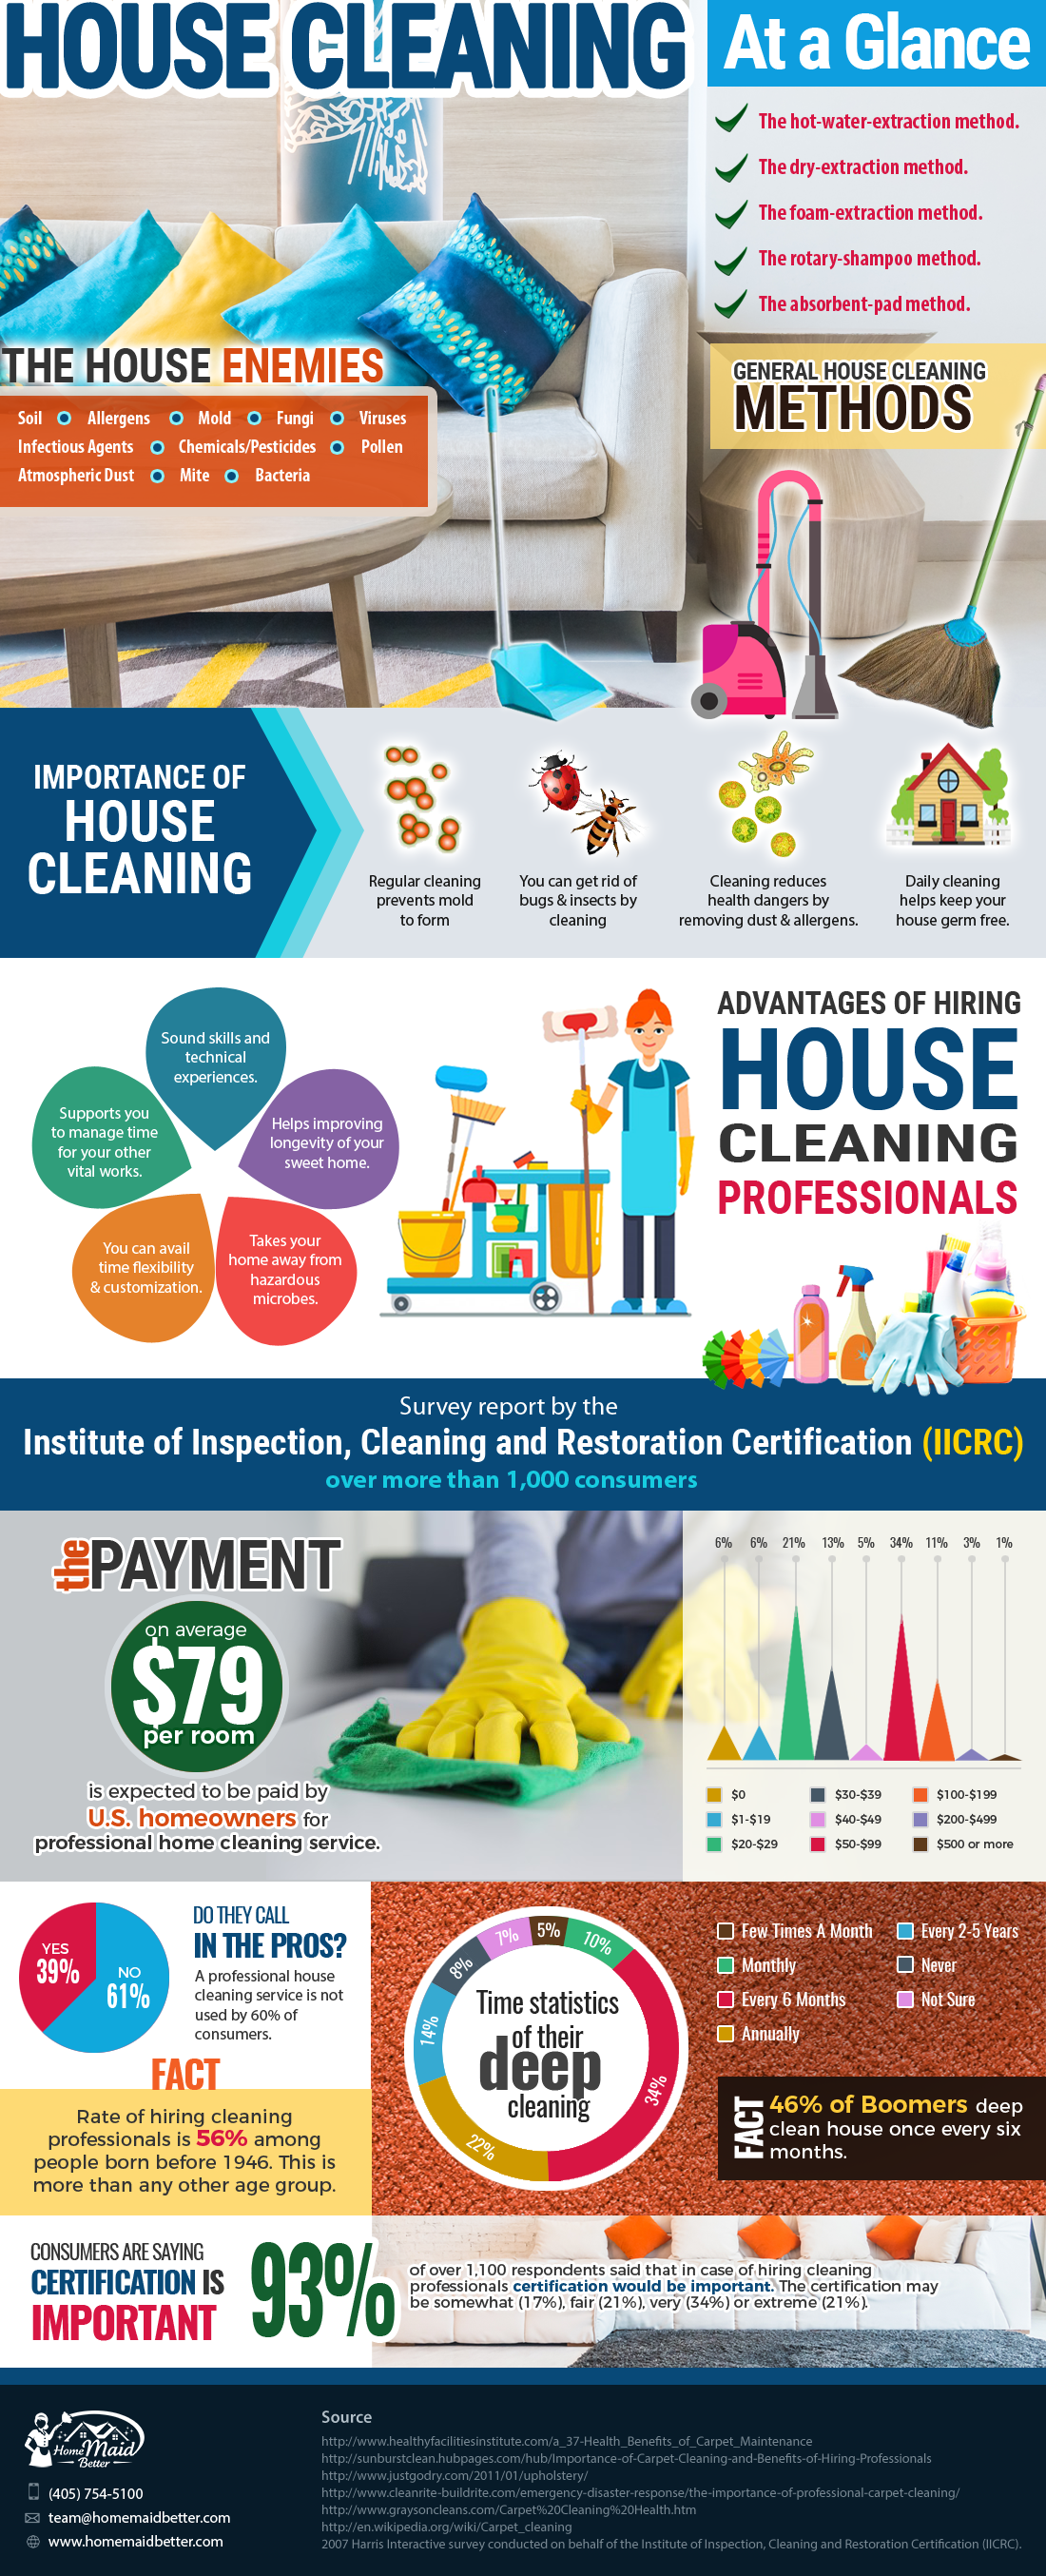 5 Easy Facts About House Washing Company Clover Sc Shown